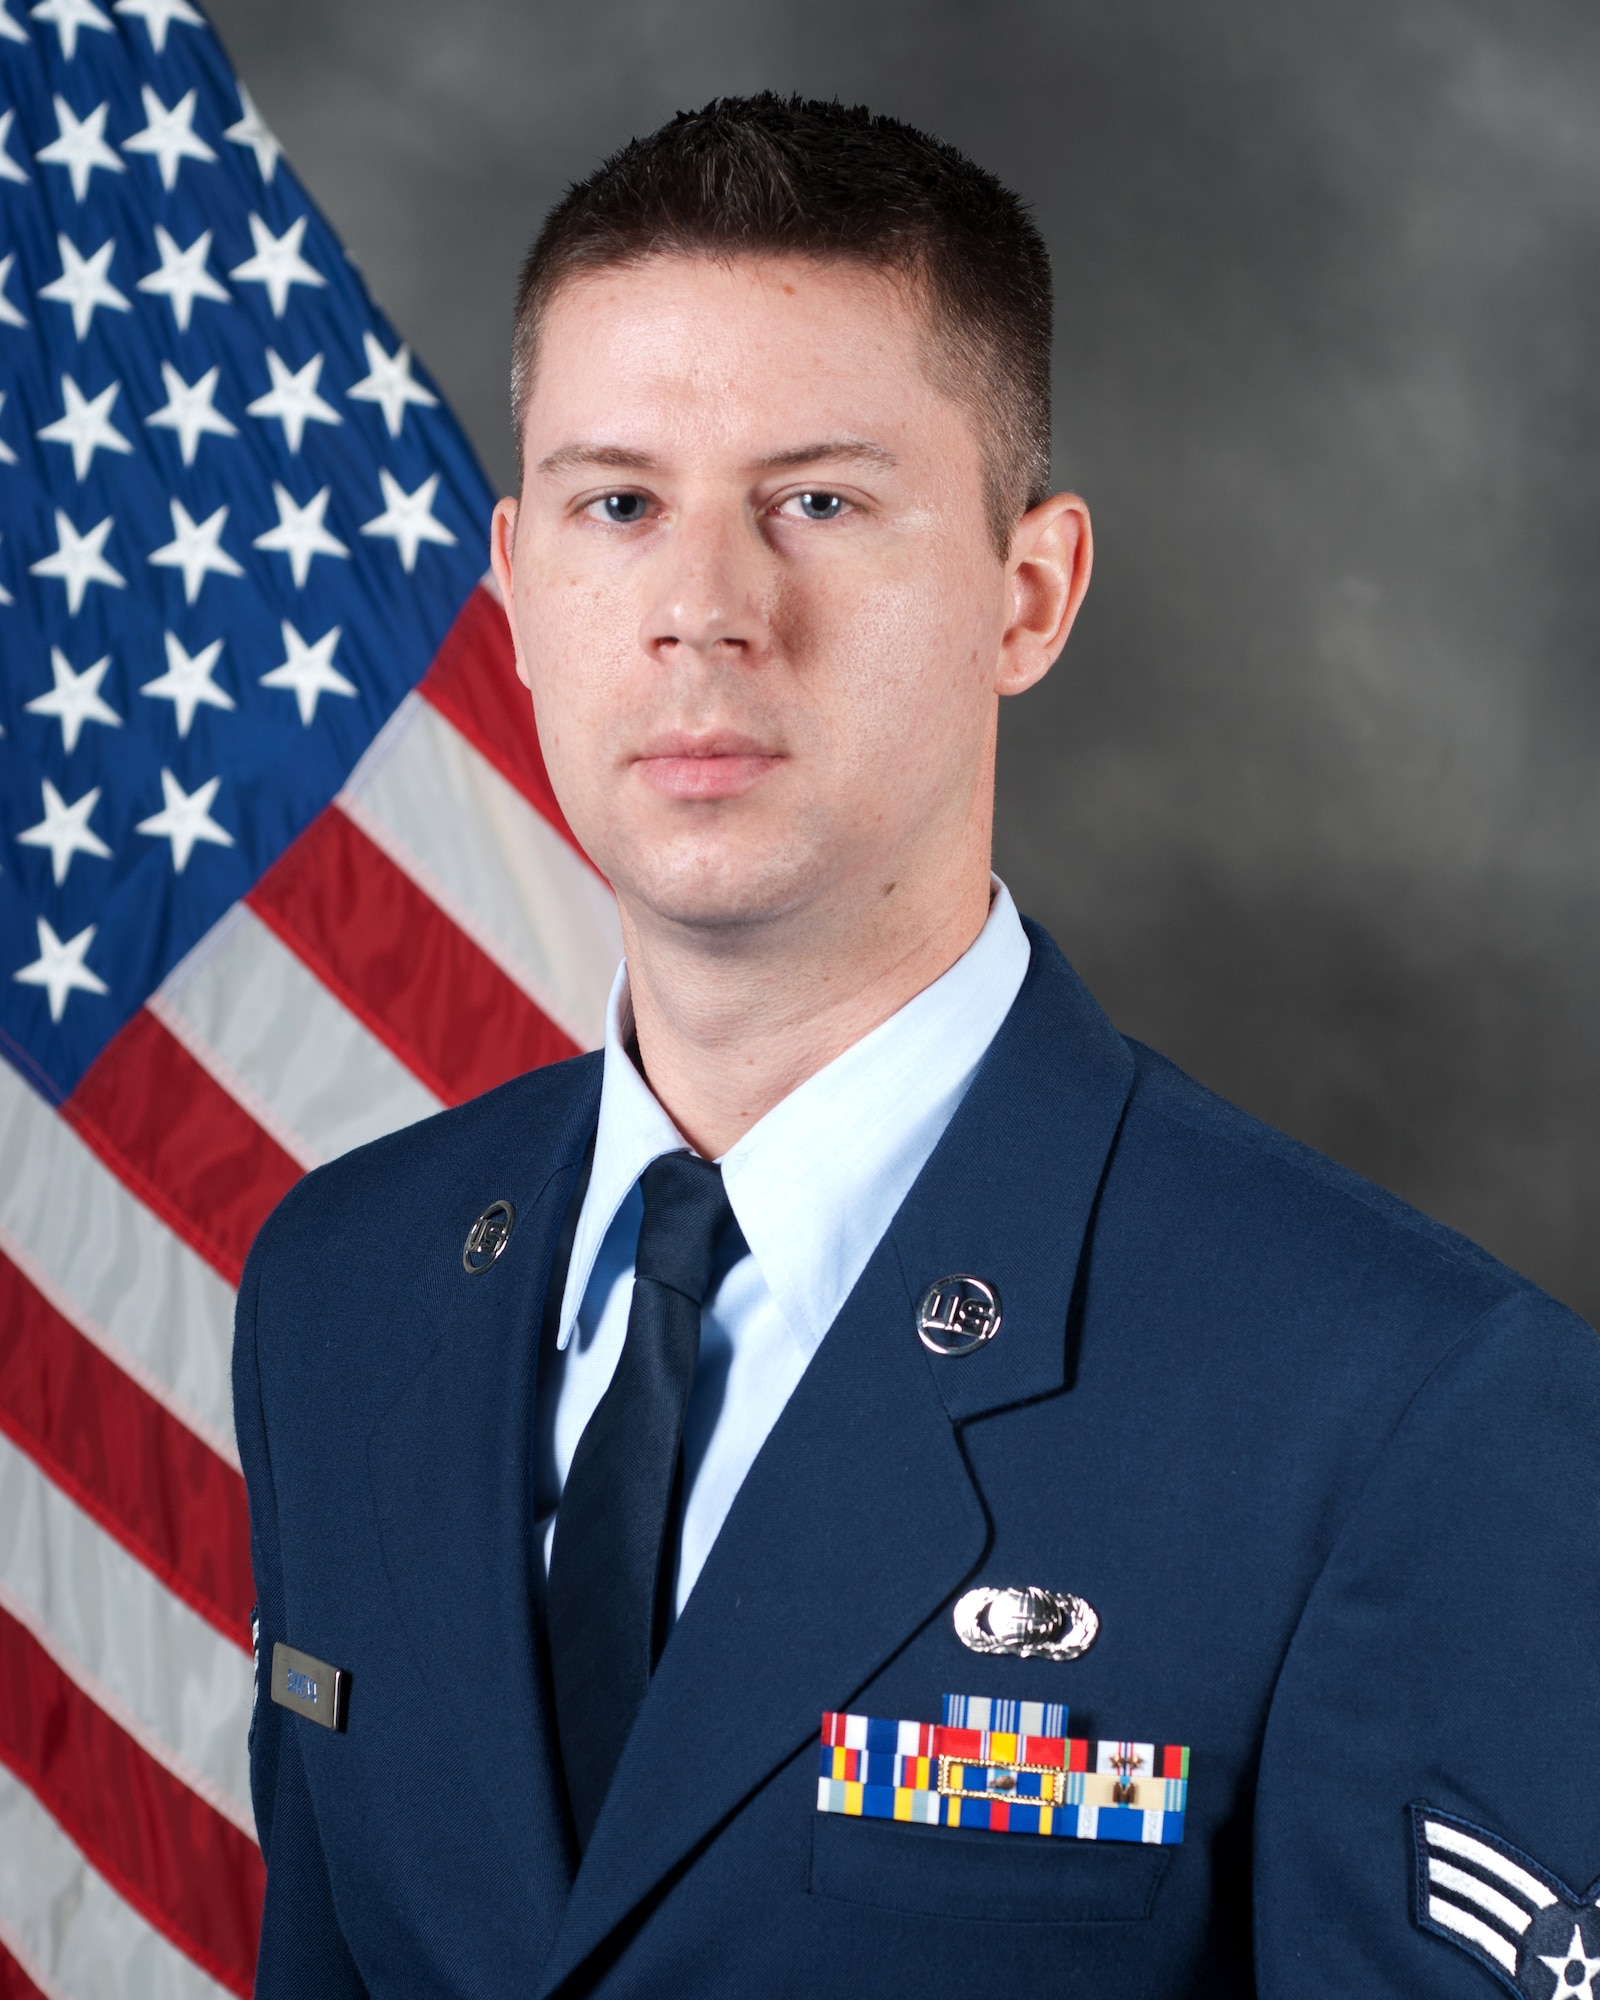 Senior Airman Braden Sikkema, an intelligence analyst with the 123rd Operations Group, has been named the Kentucky Air National Guard's 2012 Outstanding Airman of the Year in the Airman category.  Sikkema has deployed twice and was selected for several special assignments in the commonwealth in 2011. (U.S. Air Force photo by Master Sgt. Phil Speck)